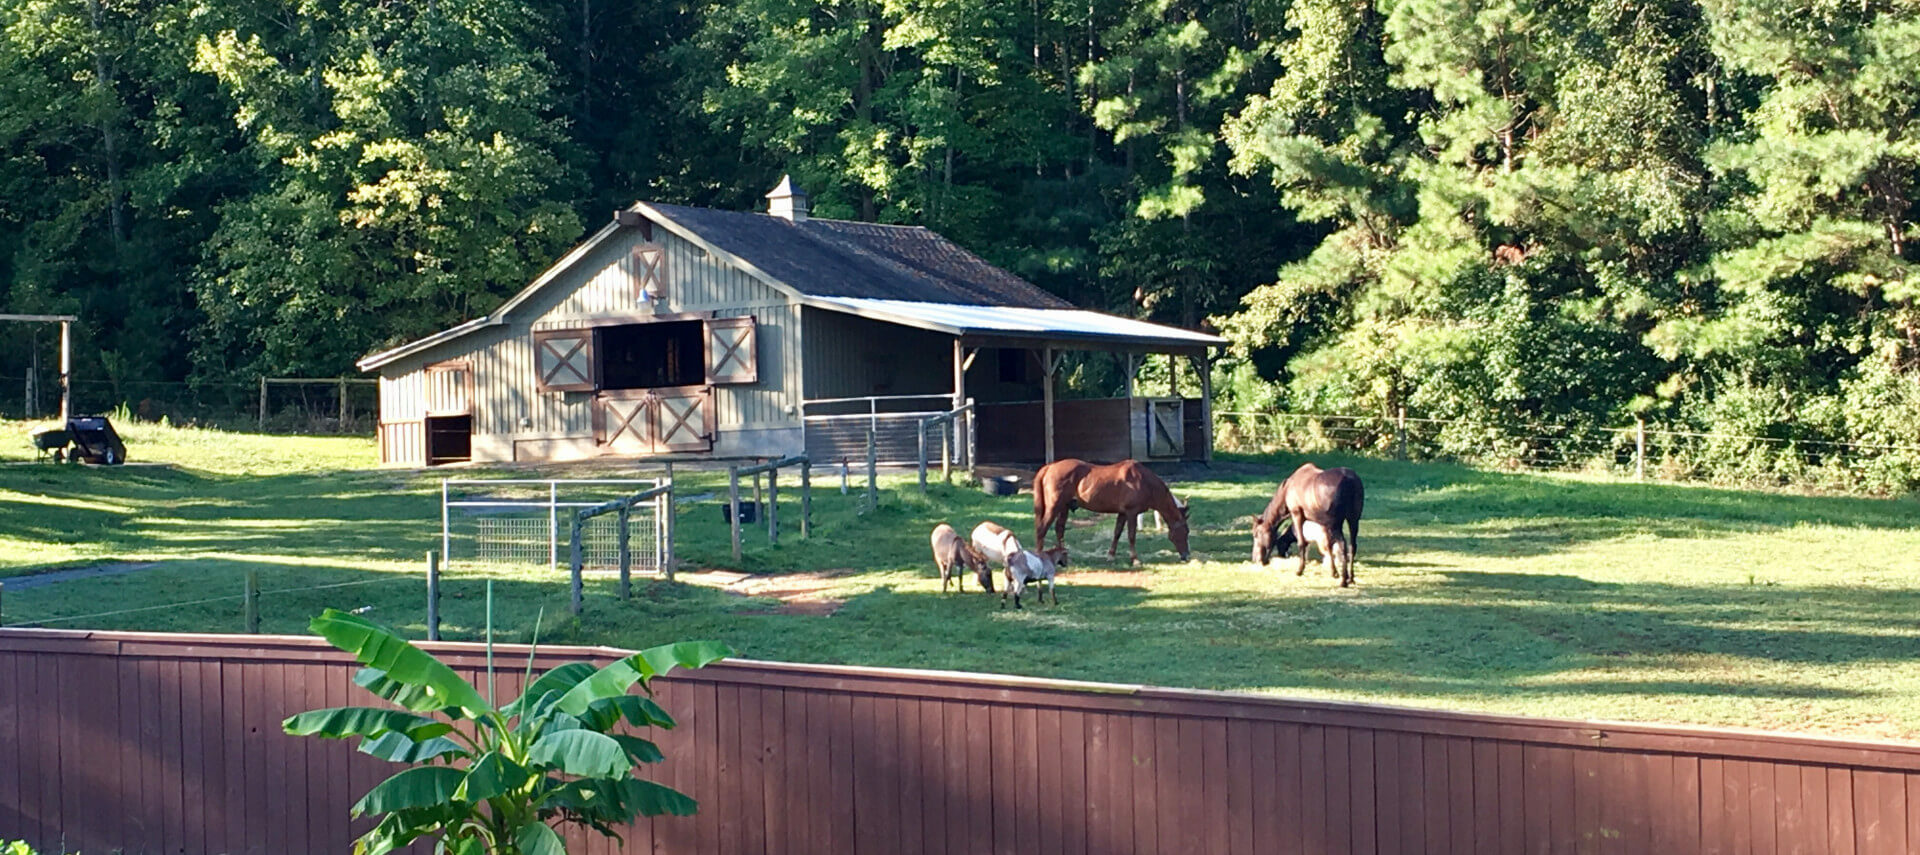 Horses and donkeys grazing in yard with cream barn by woods in the background